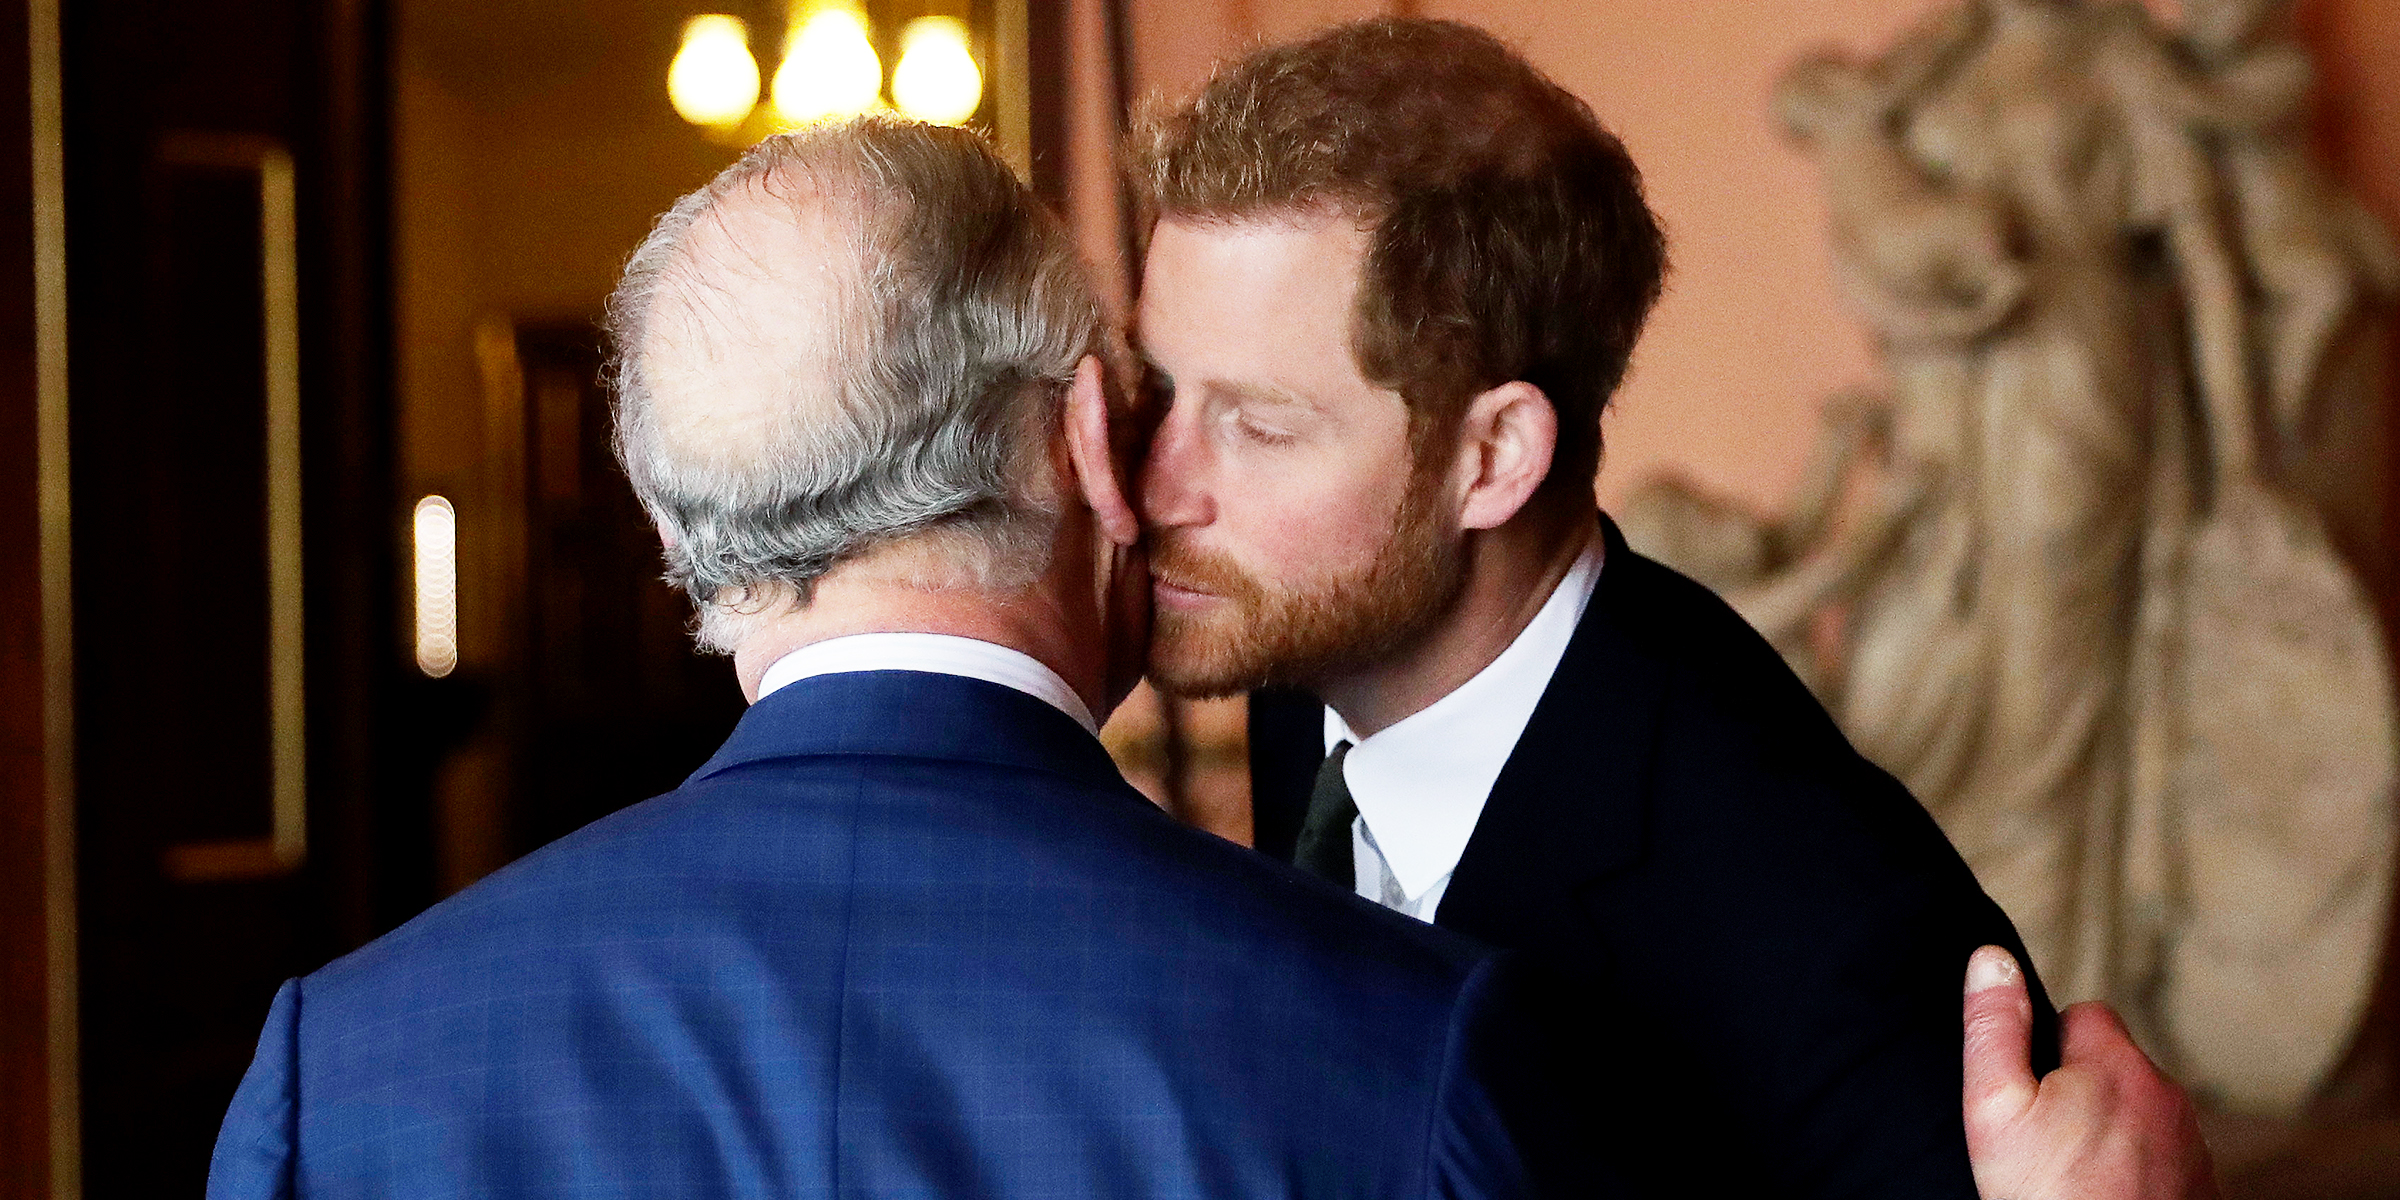 King Charles III and Prince Harry | Source: Getty Images